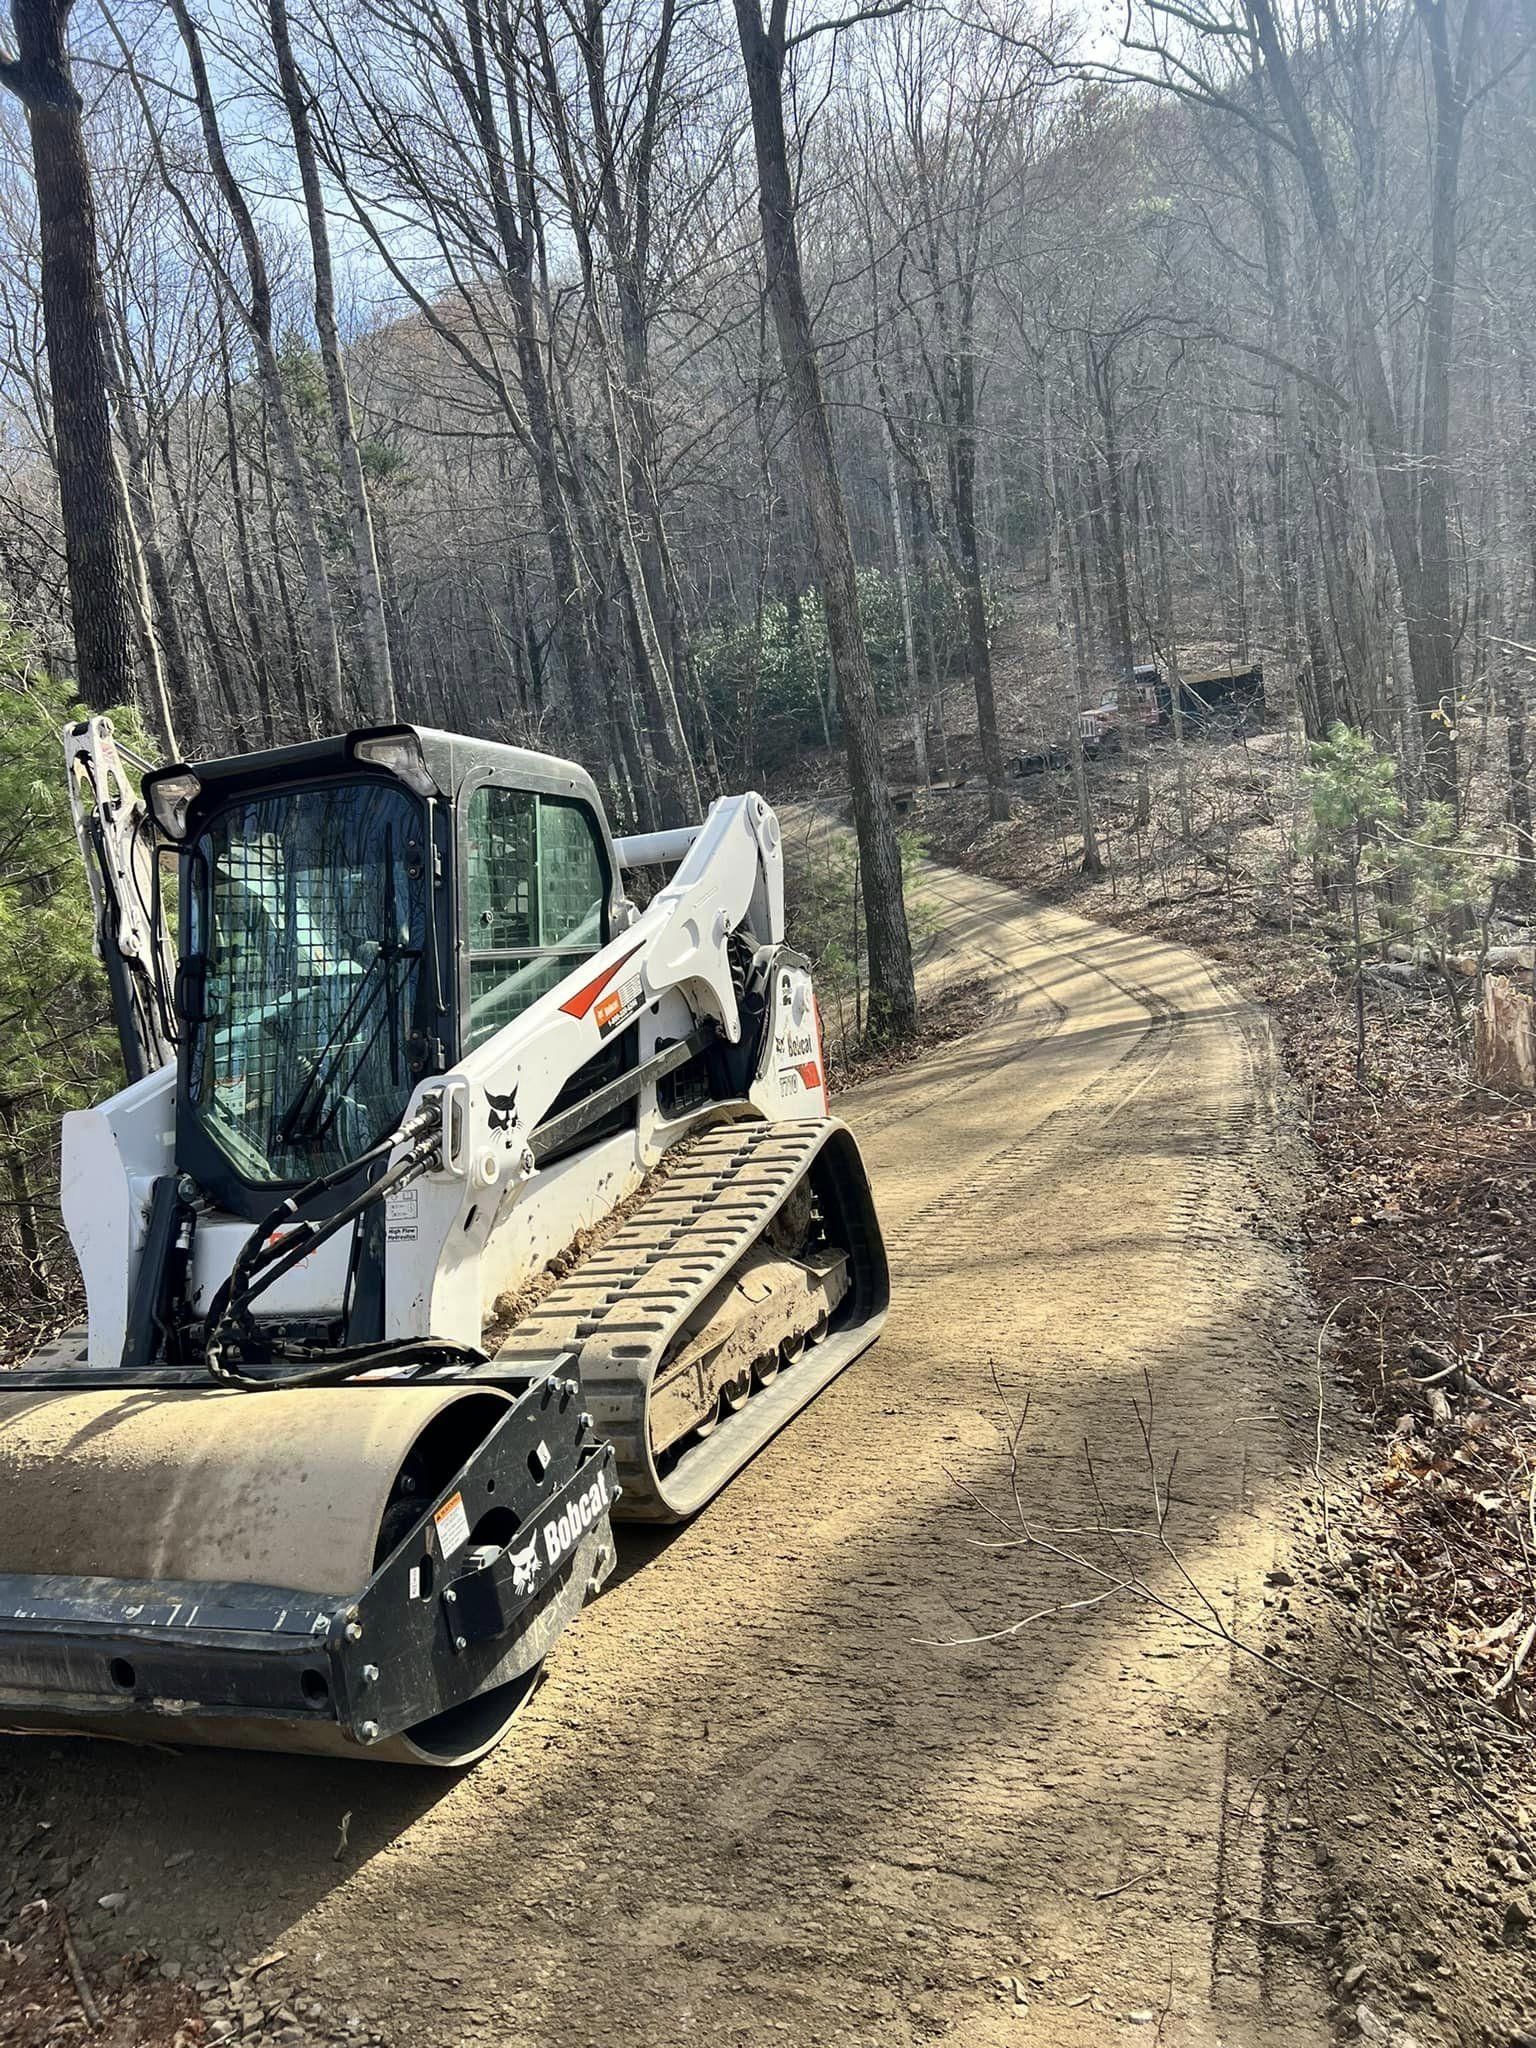 Driveway Consctruction and Repair for Elias Grading and Hauling in Black Mountain, NC